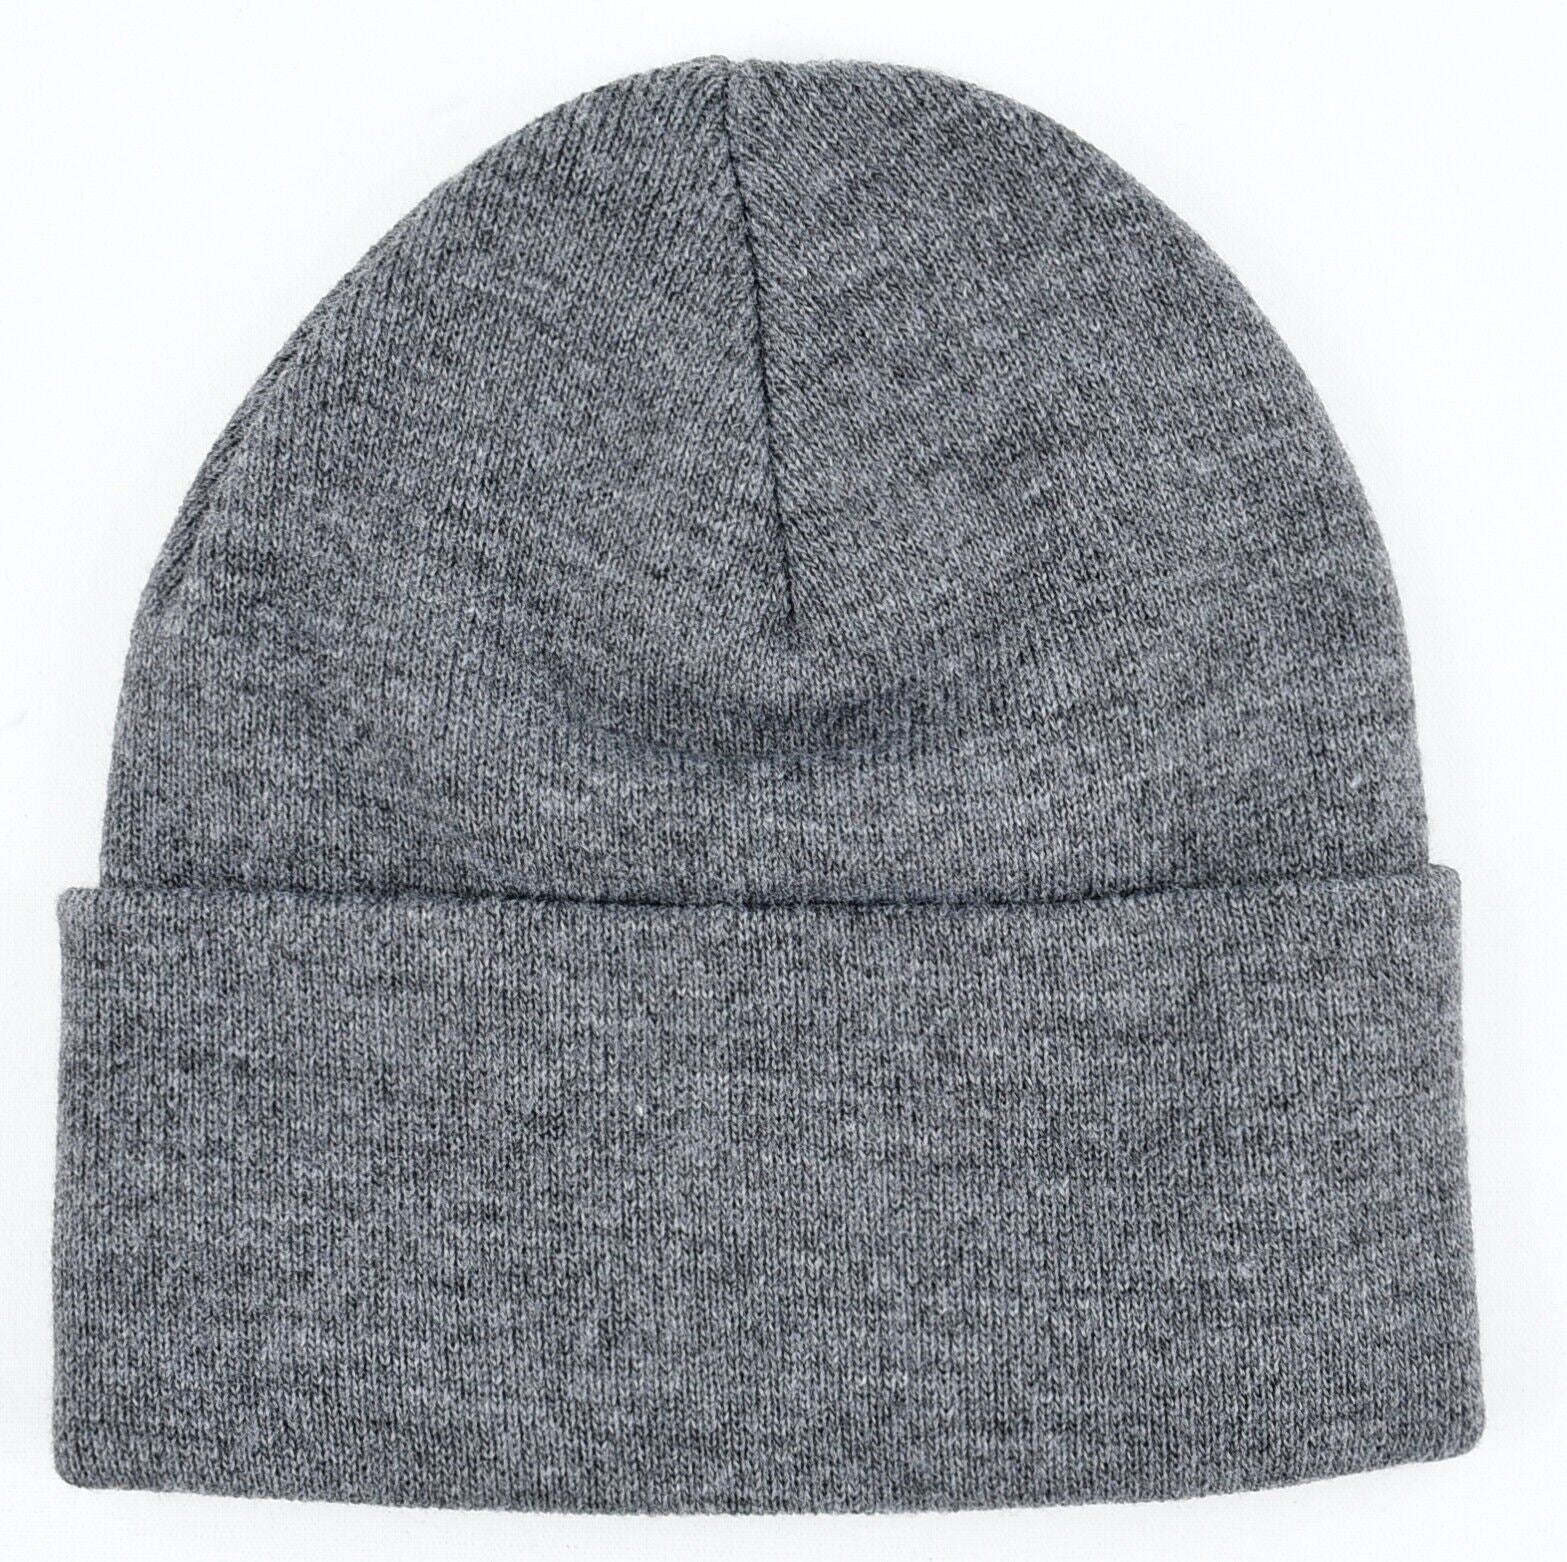 LEVIS Mens Womens Knitted Beanie Hat, Grey Heather